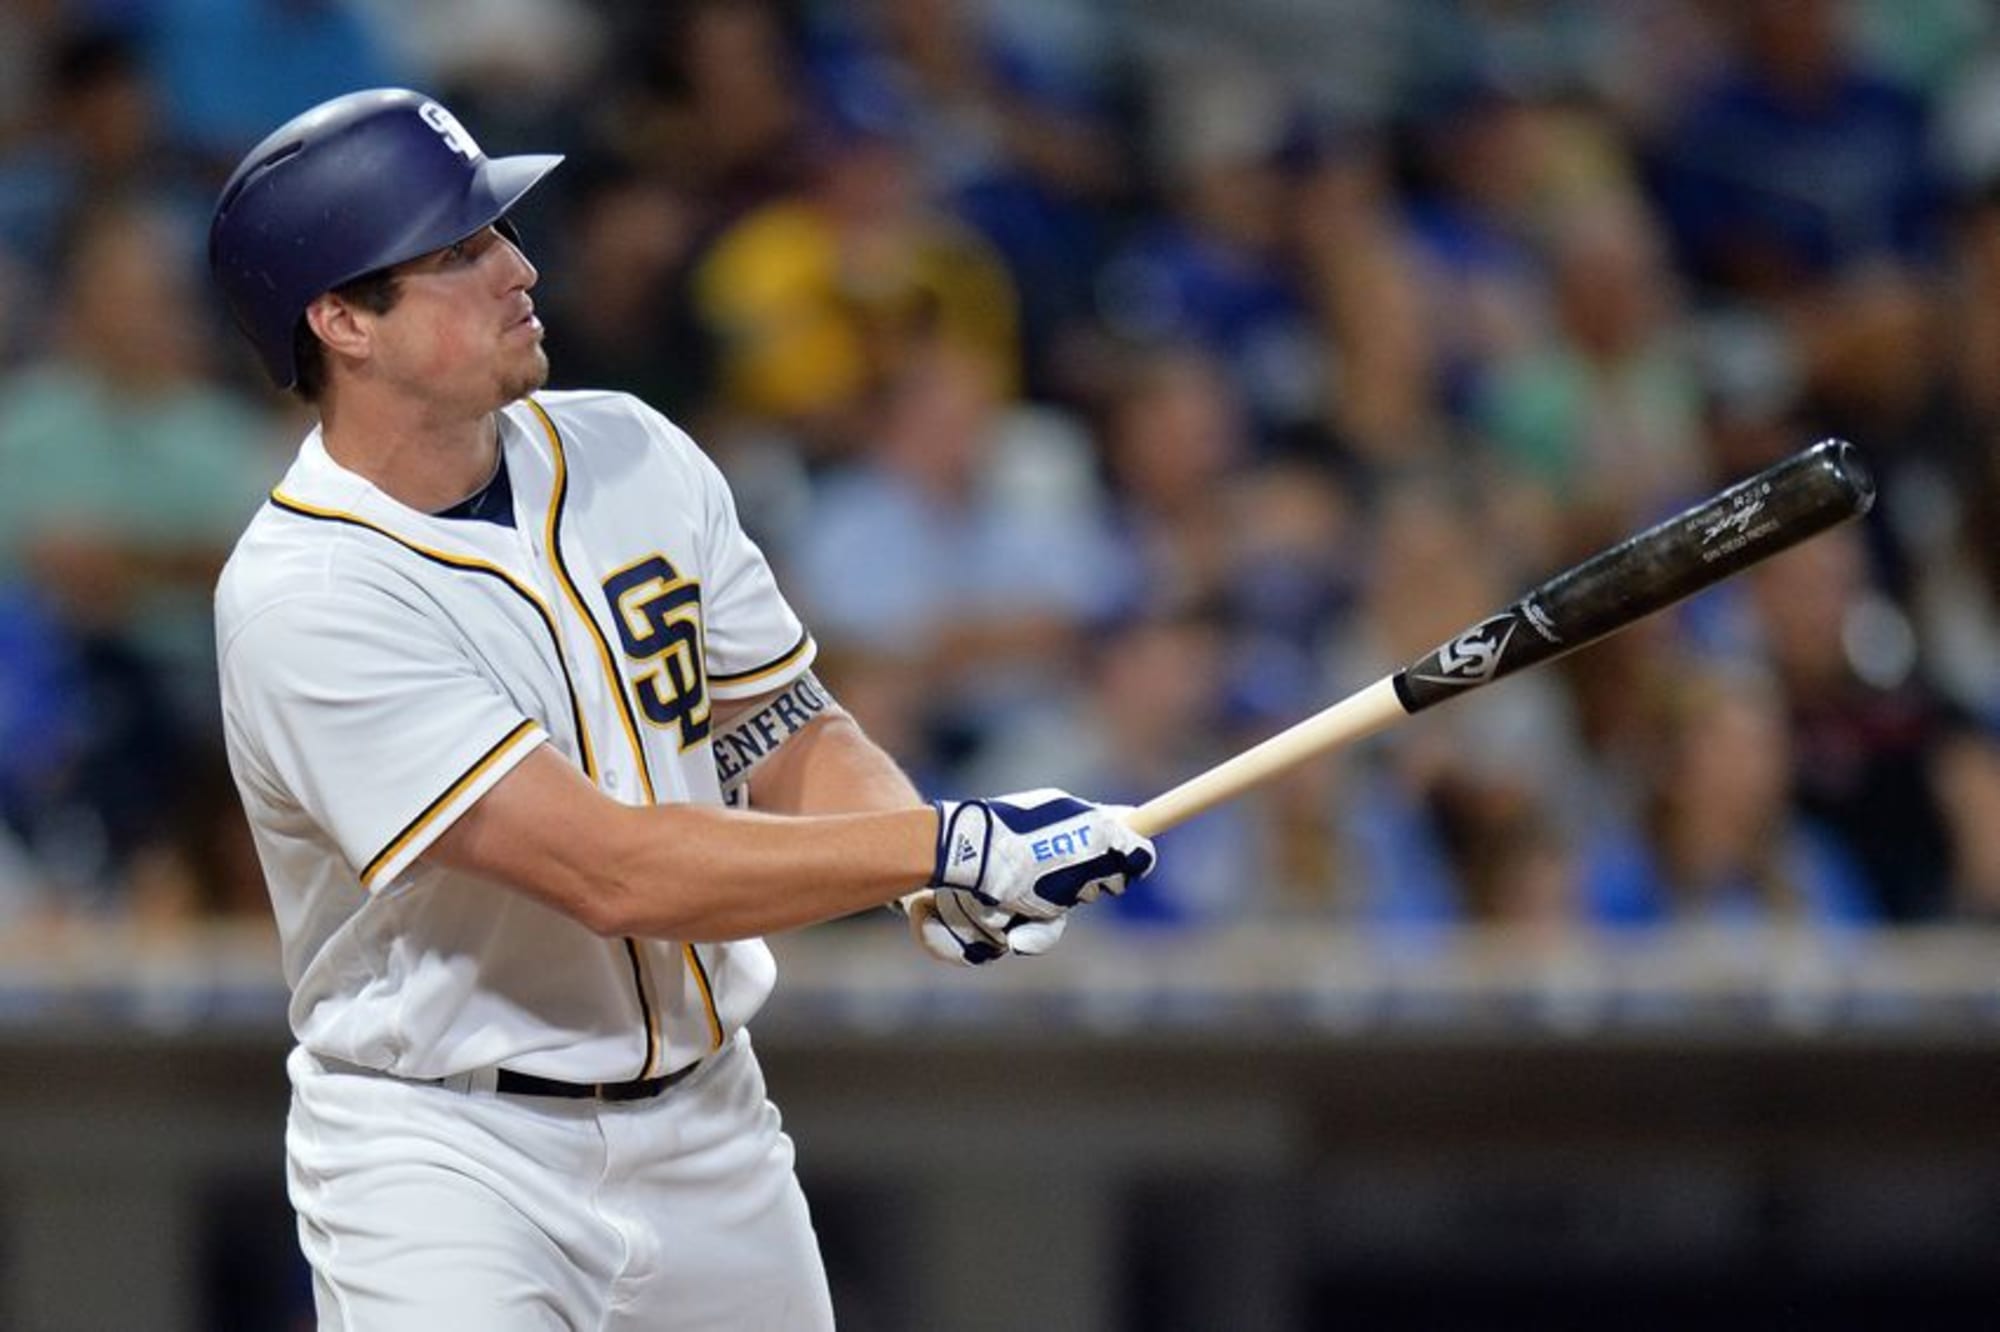 San Diego Padres: Hunter Renfroe, 2017 Rookie of the Year Candidate